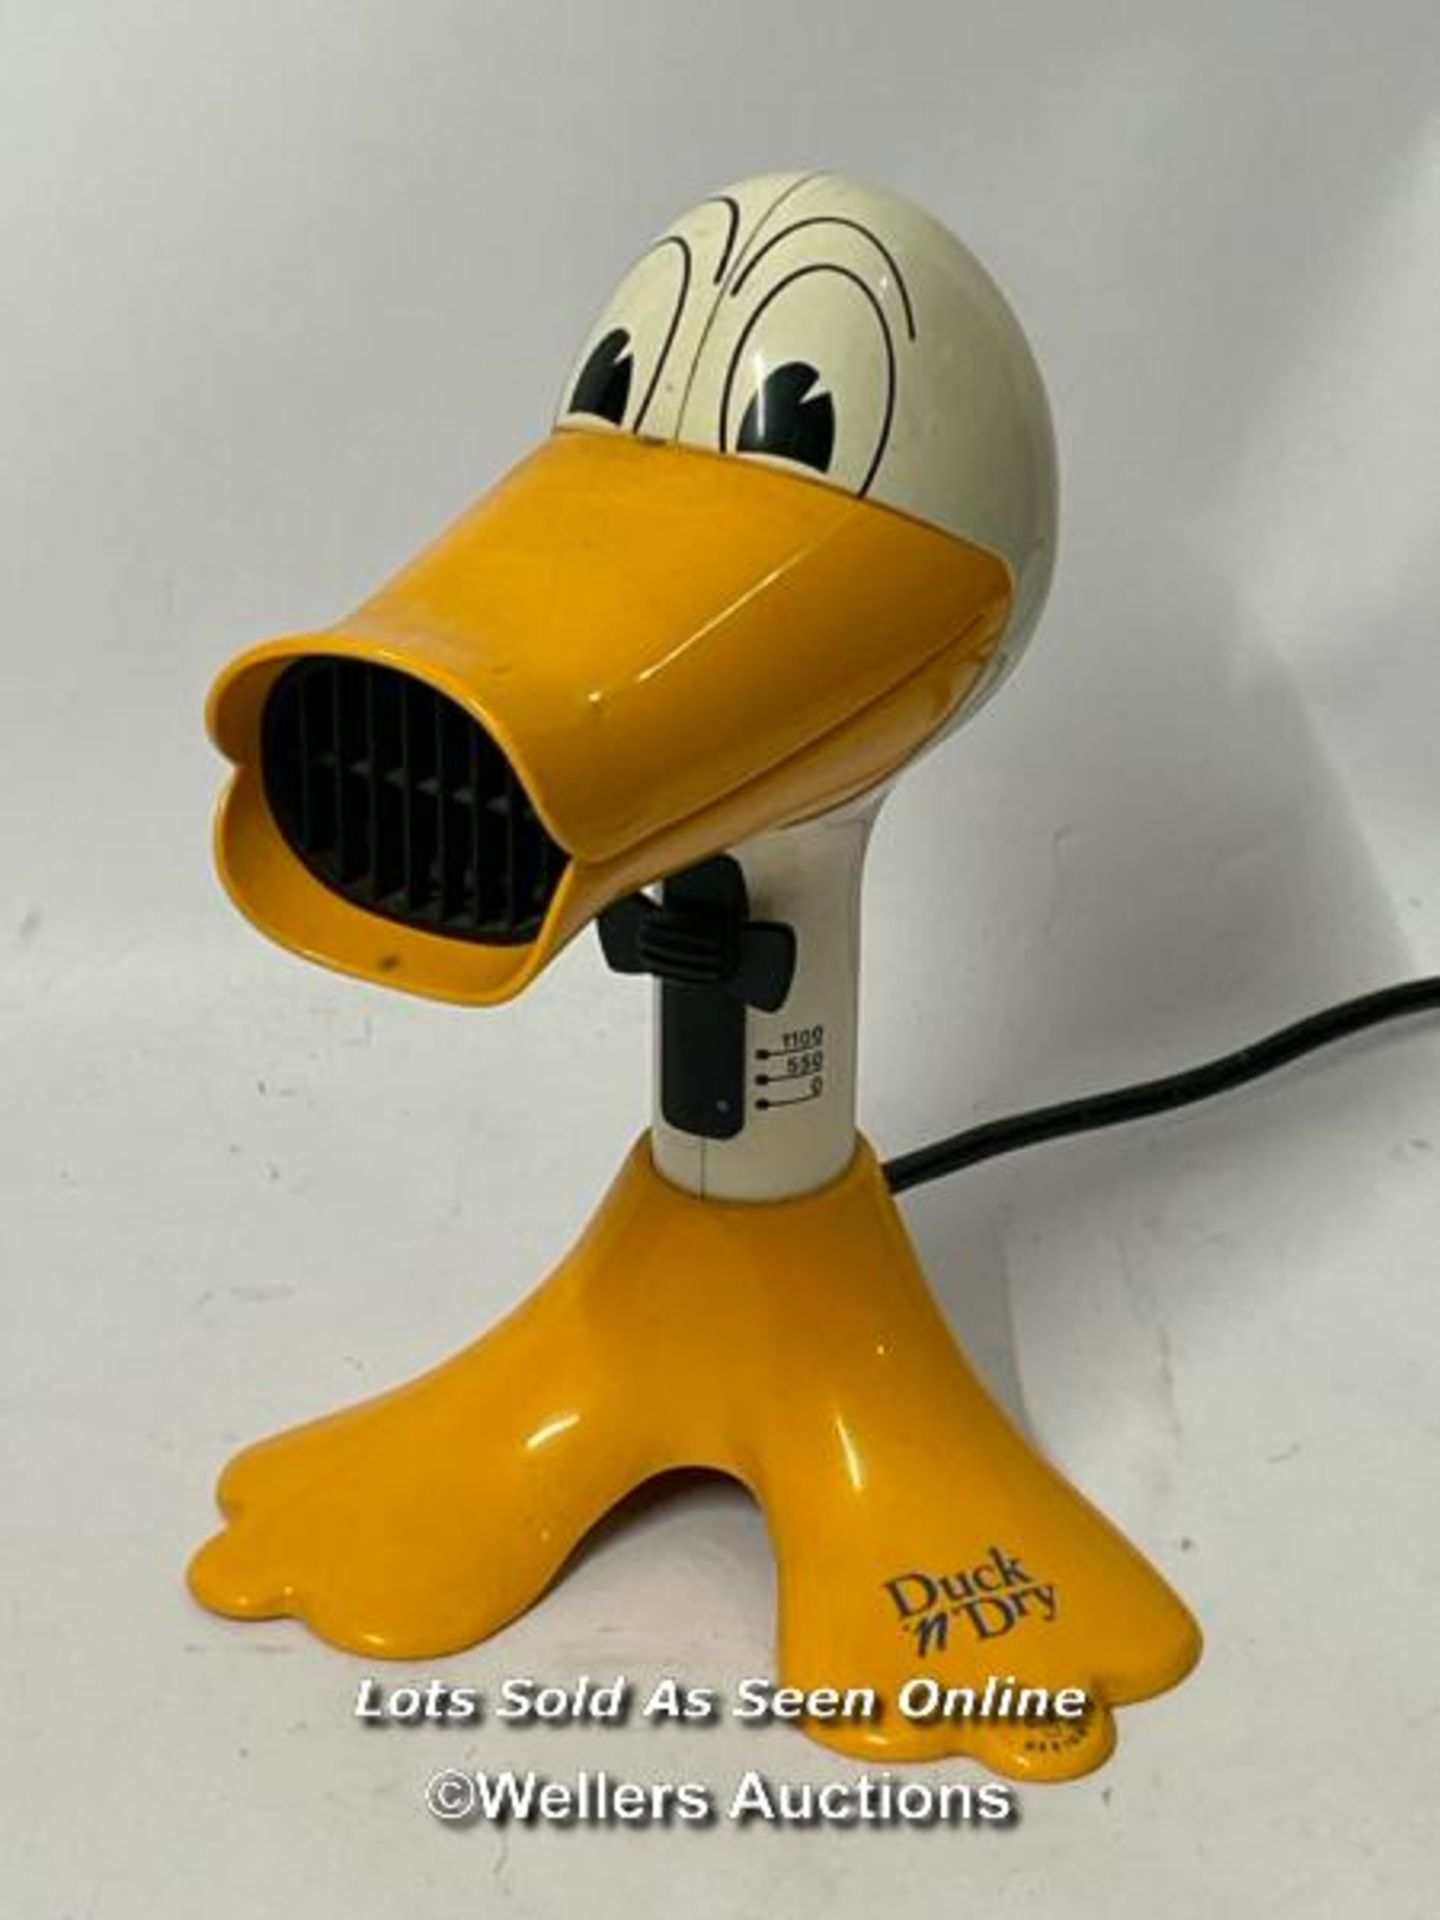 Vintage Remington Duck 'N' Dry novelty hair dryer, briefly tested appears to be in working order /